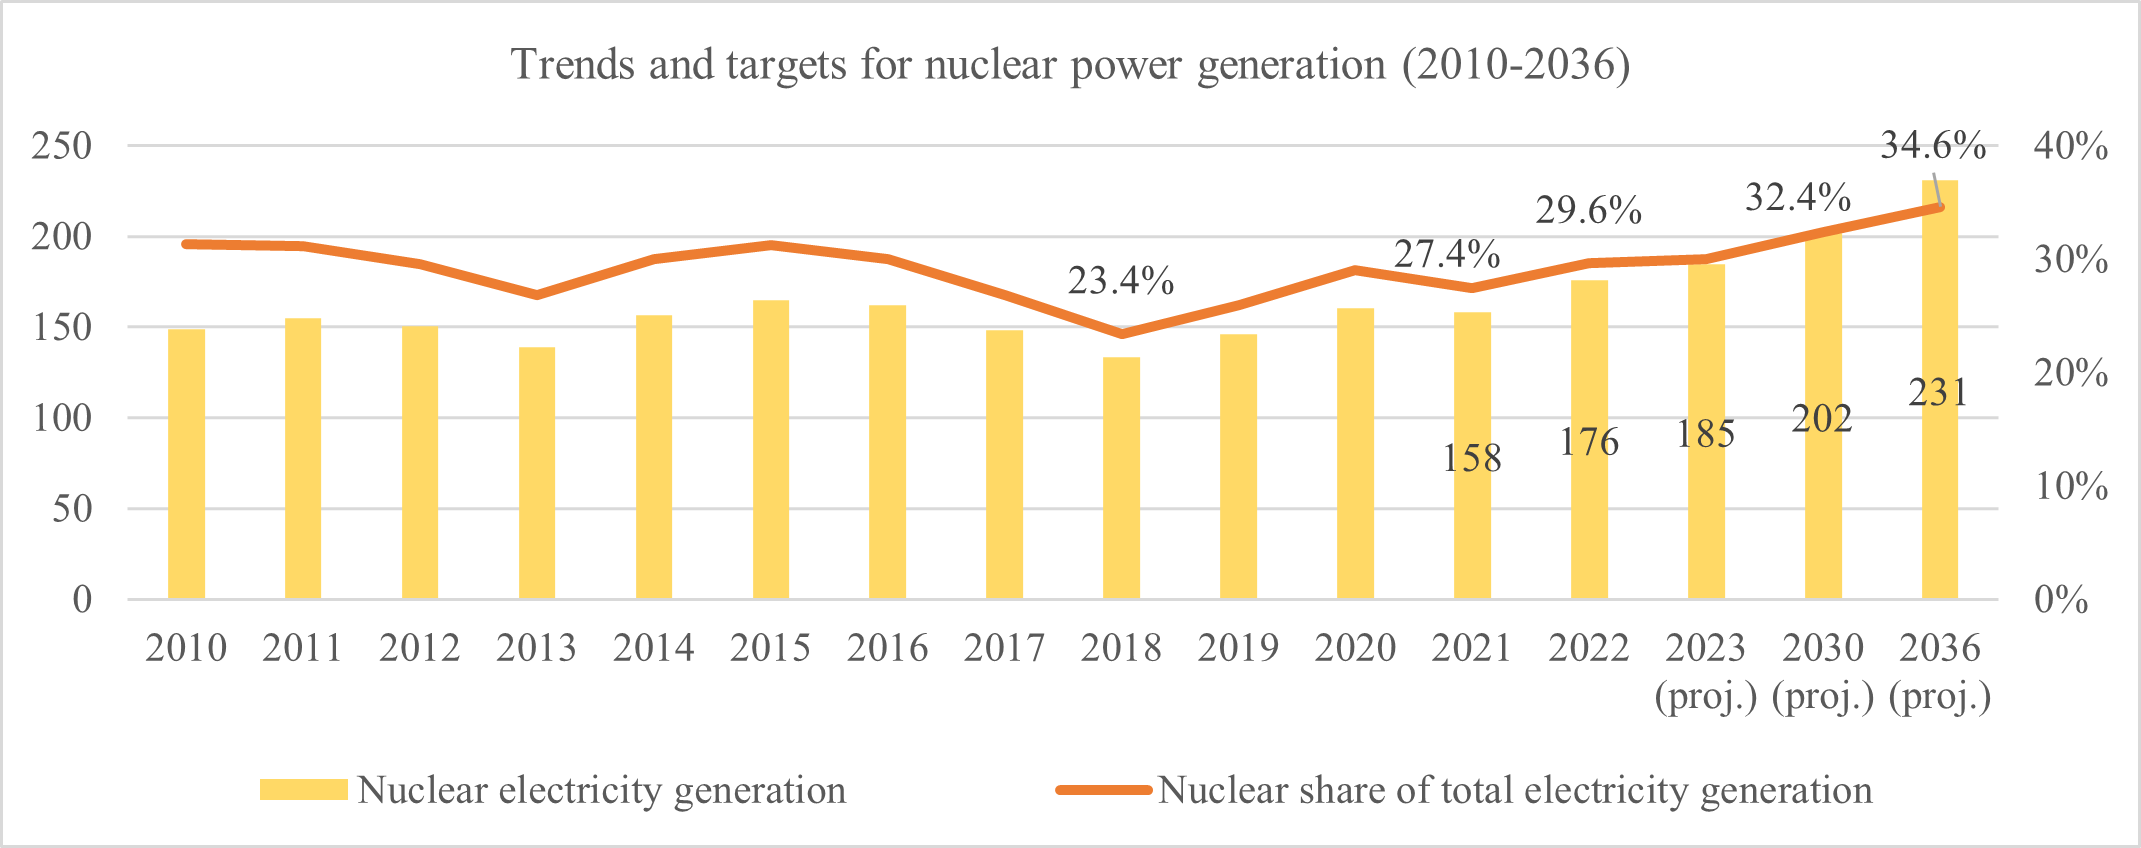 Korea Trends and Targets for nuclear Power Generation - 2010-36